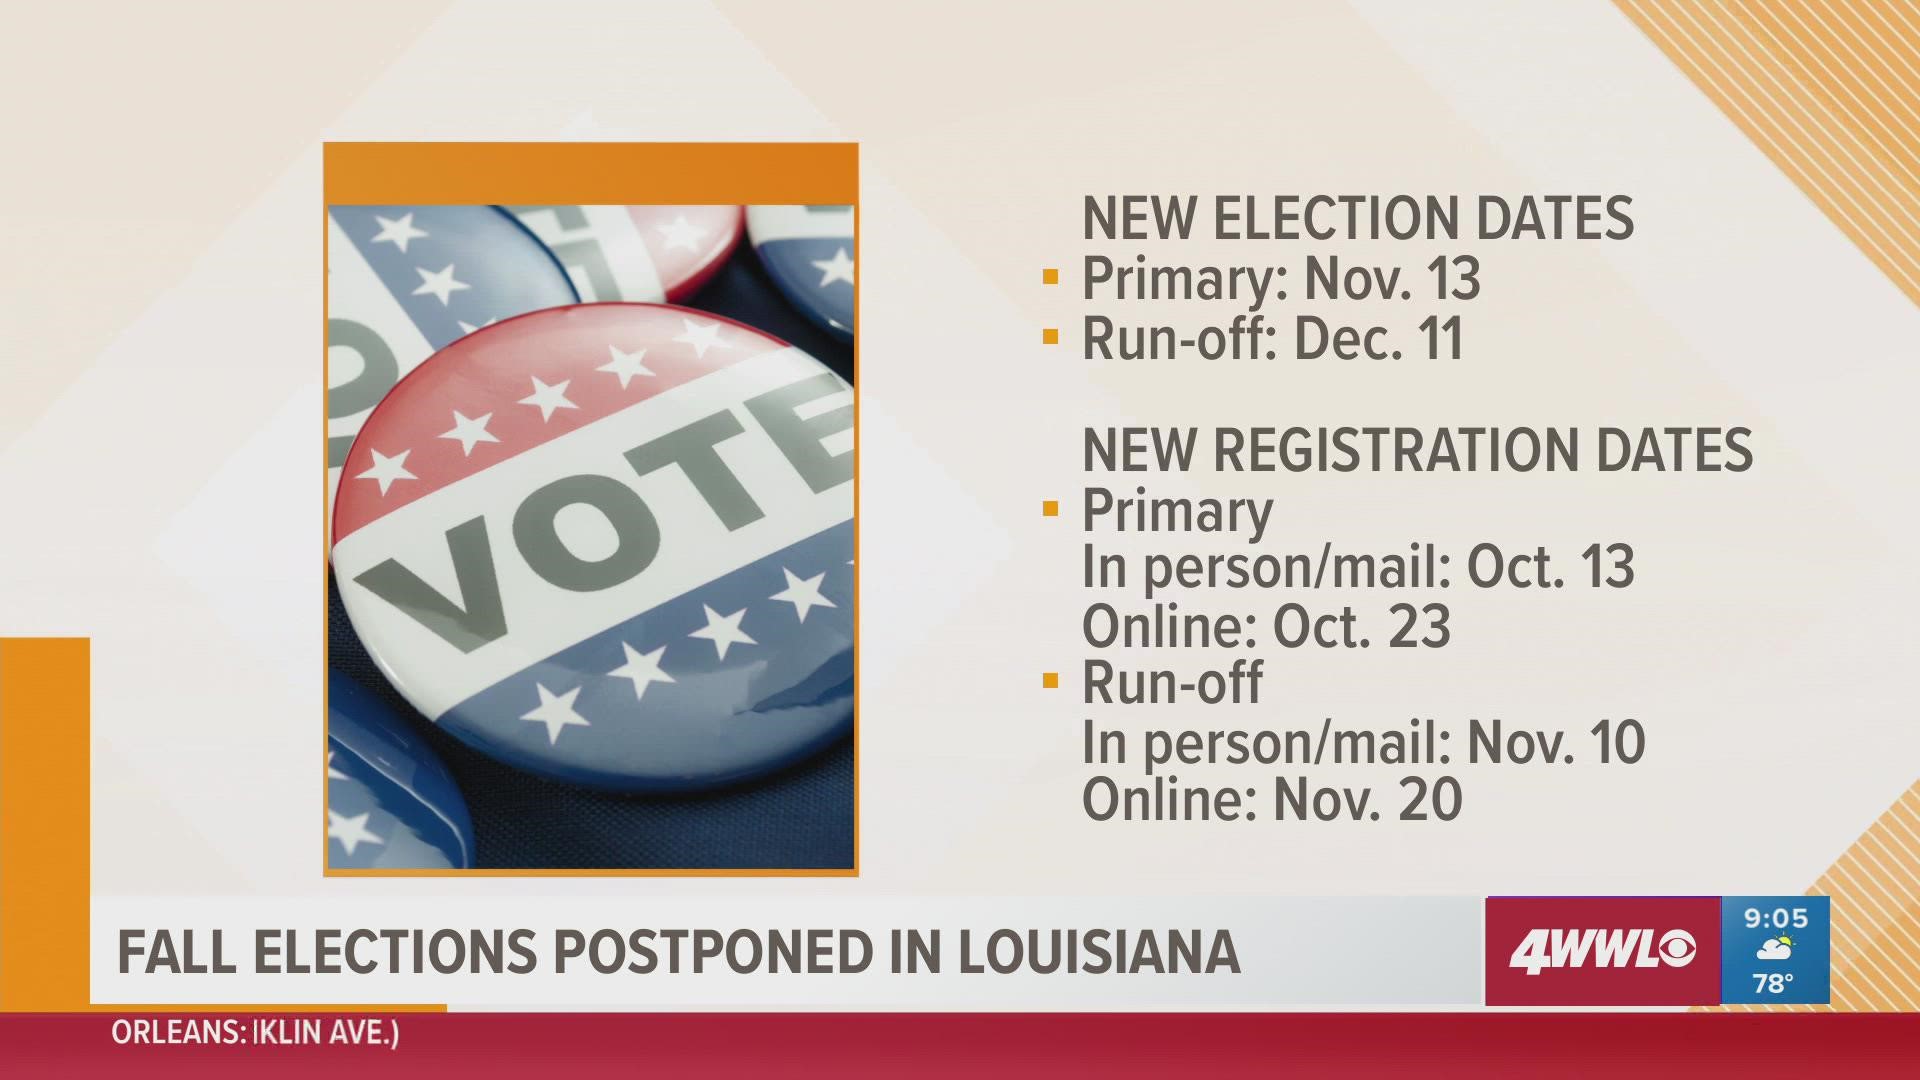 The governor approved the secretary of state's plan to postpone the upcoming fall election in Louisiana as polling stations are repaired.